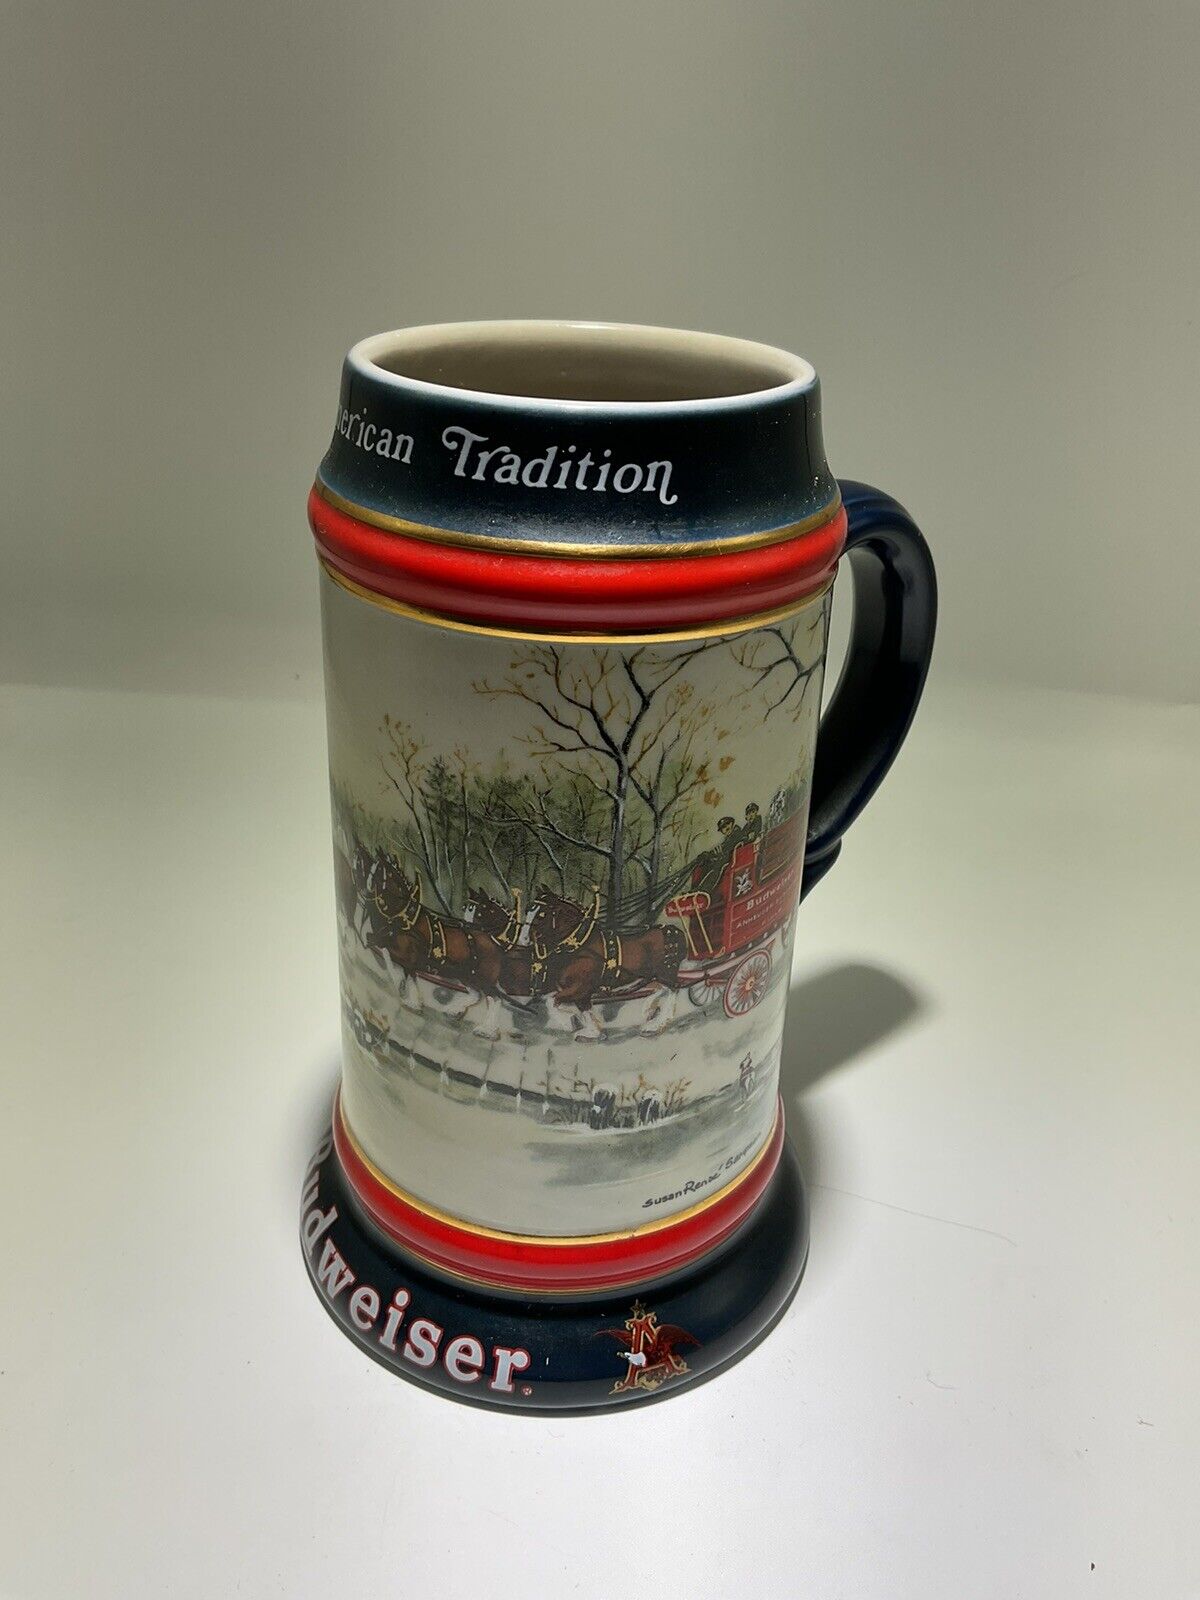 1990 Budweiser Beer Holiday Christmas Stein Mug With Clydesdales by Ceramarte